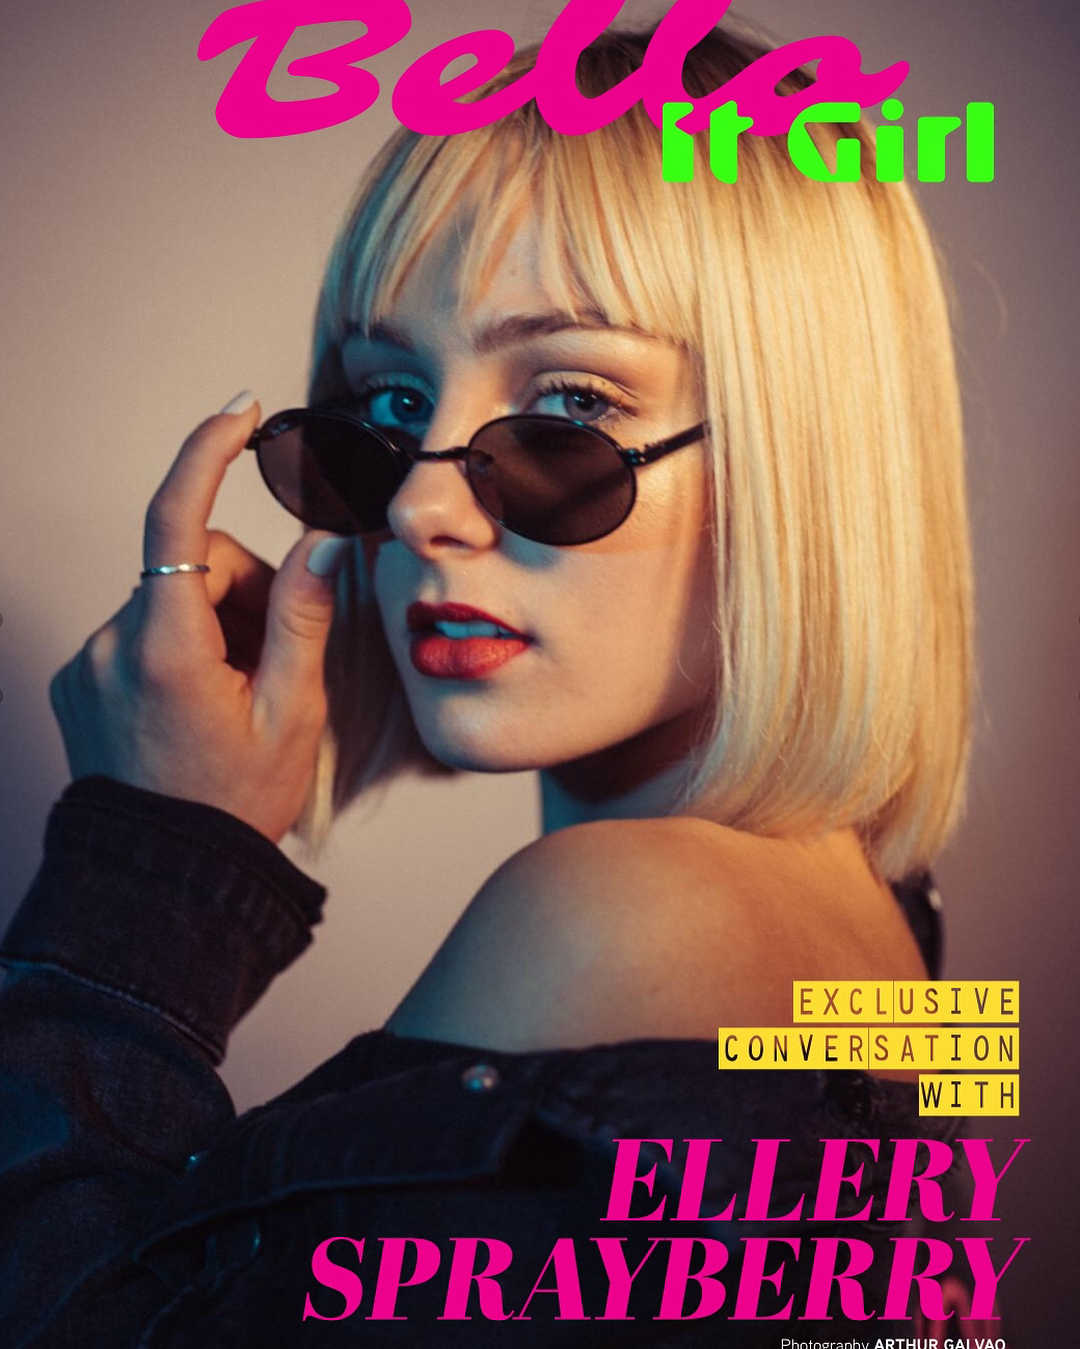 Ellery Sprayberry slaying with black sunglasses from the exclusive conversation with Bellomag.